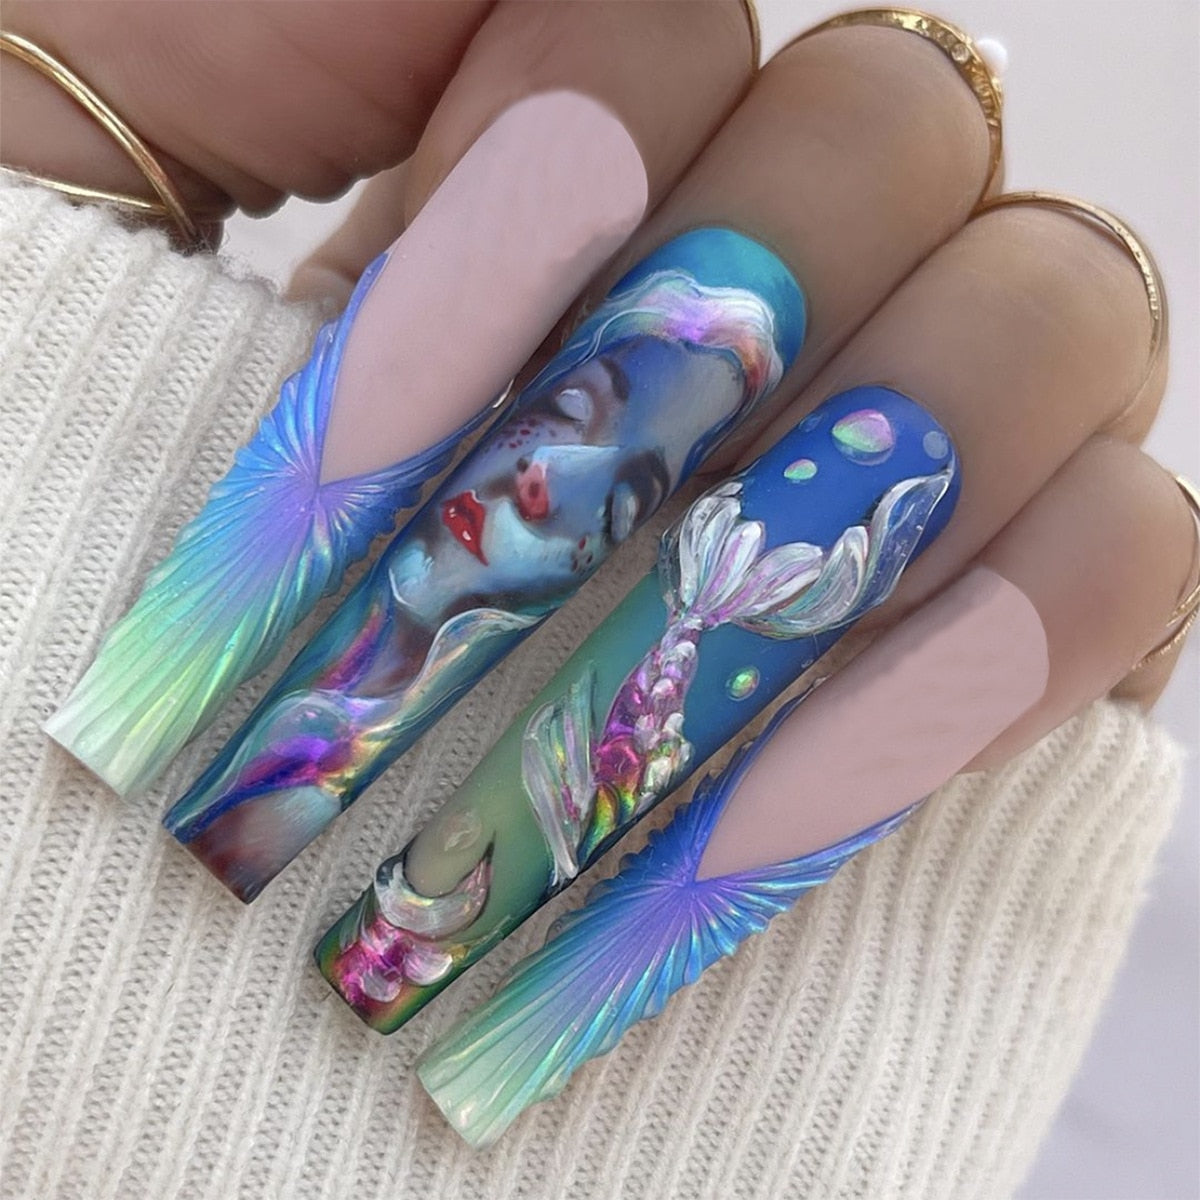 3D fake nails accessories Ocean series wearing manicure mermaid nail patch long french coffin tips press on false nail supplies